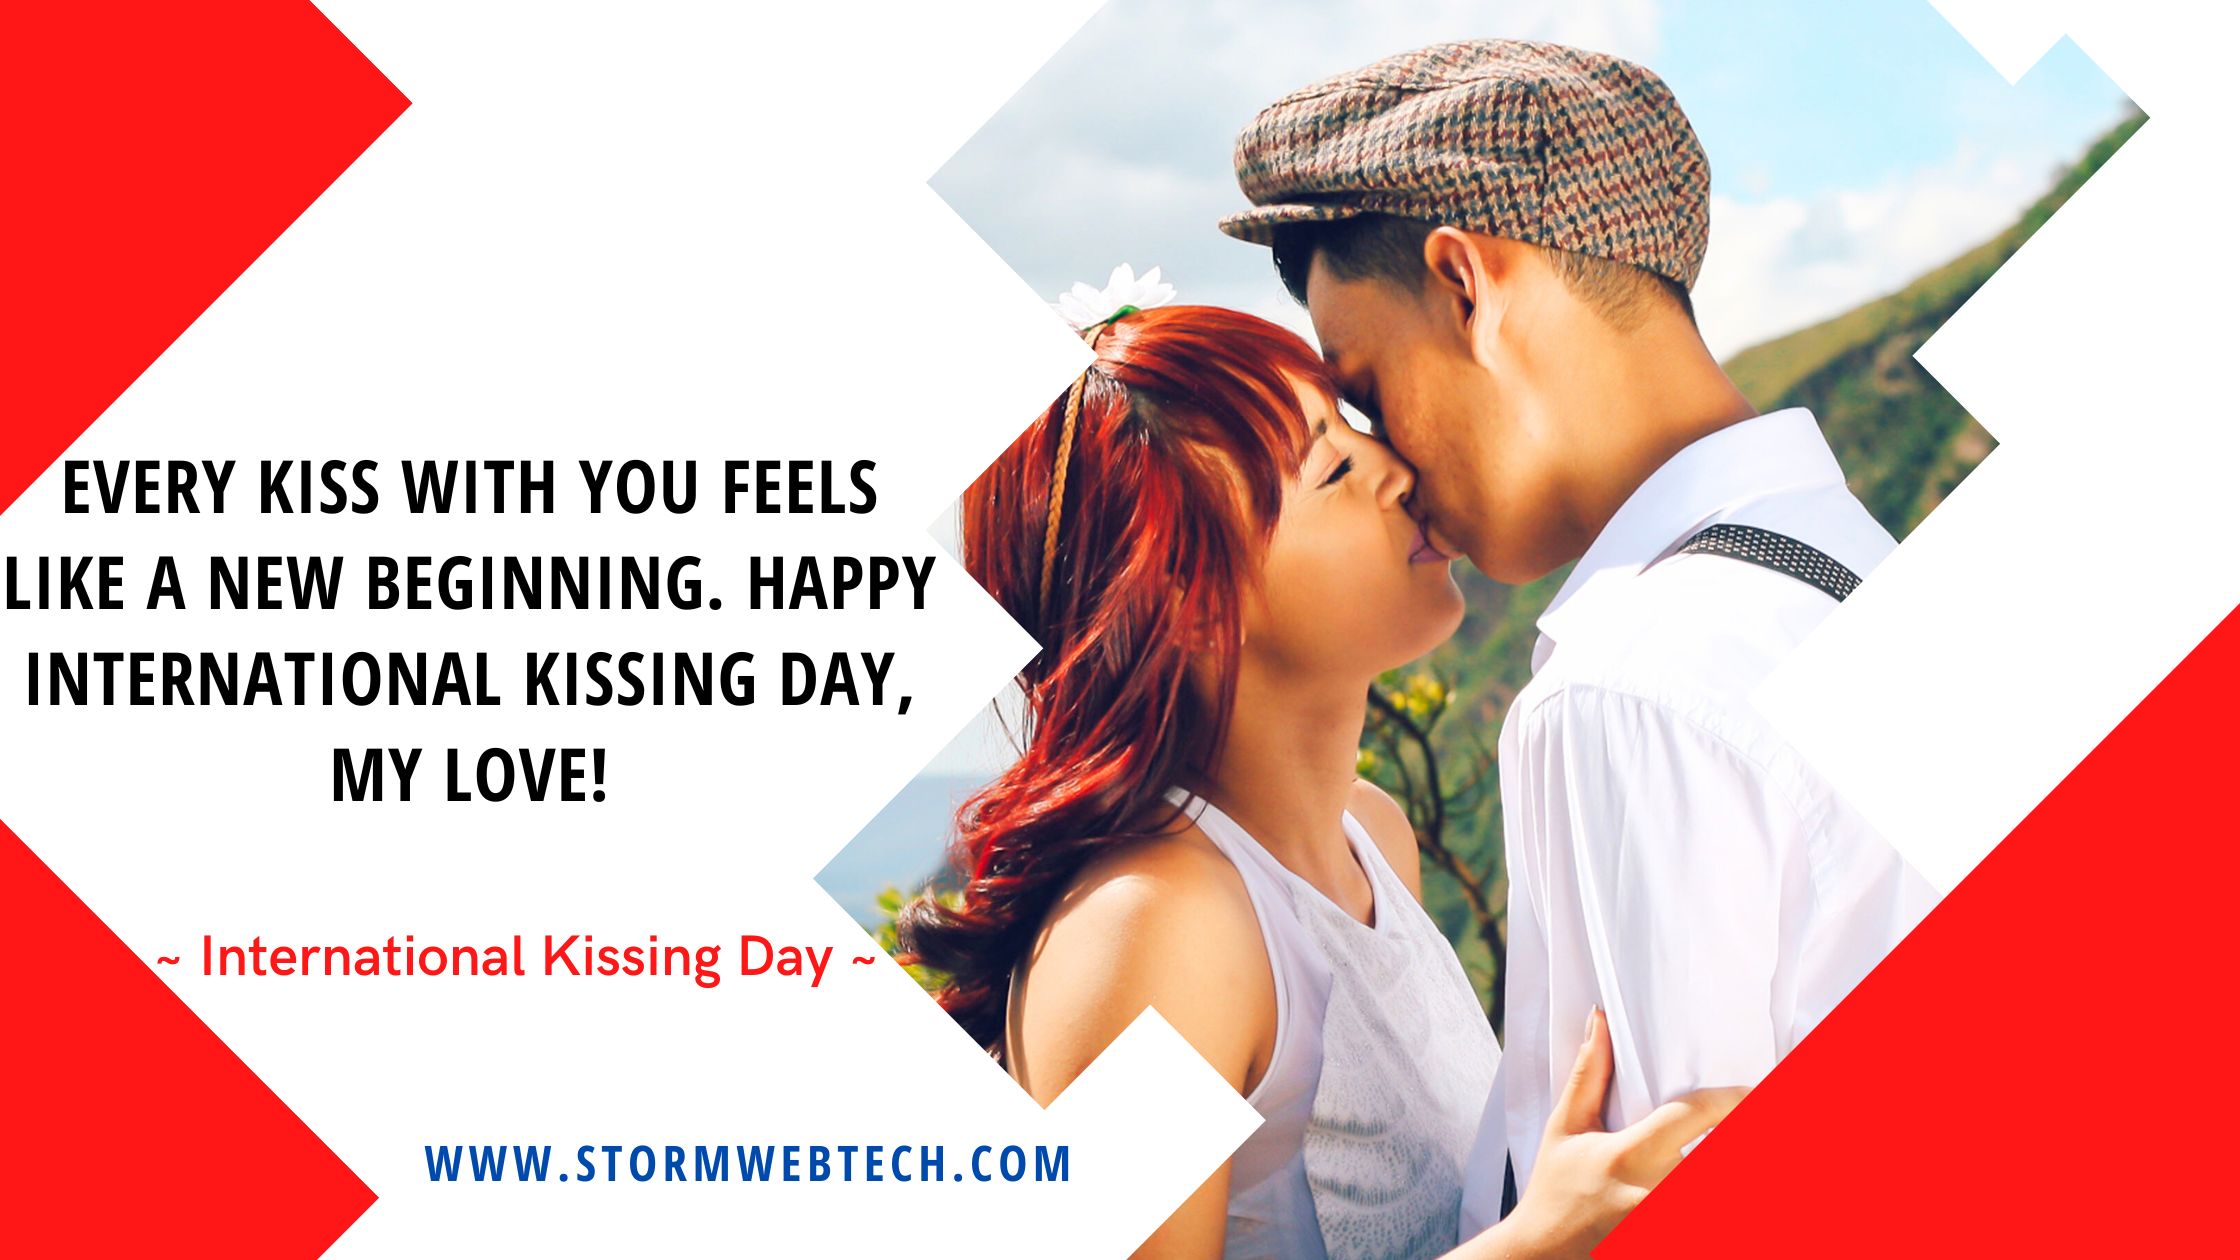 a delightful collection of international kissing day quotes, wishes, and messages to help you express your love on this International Kissing Day